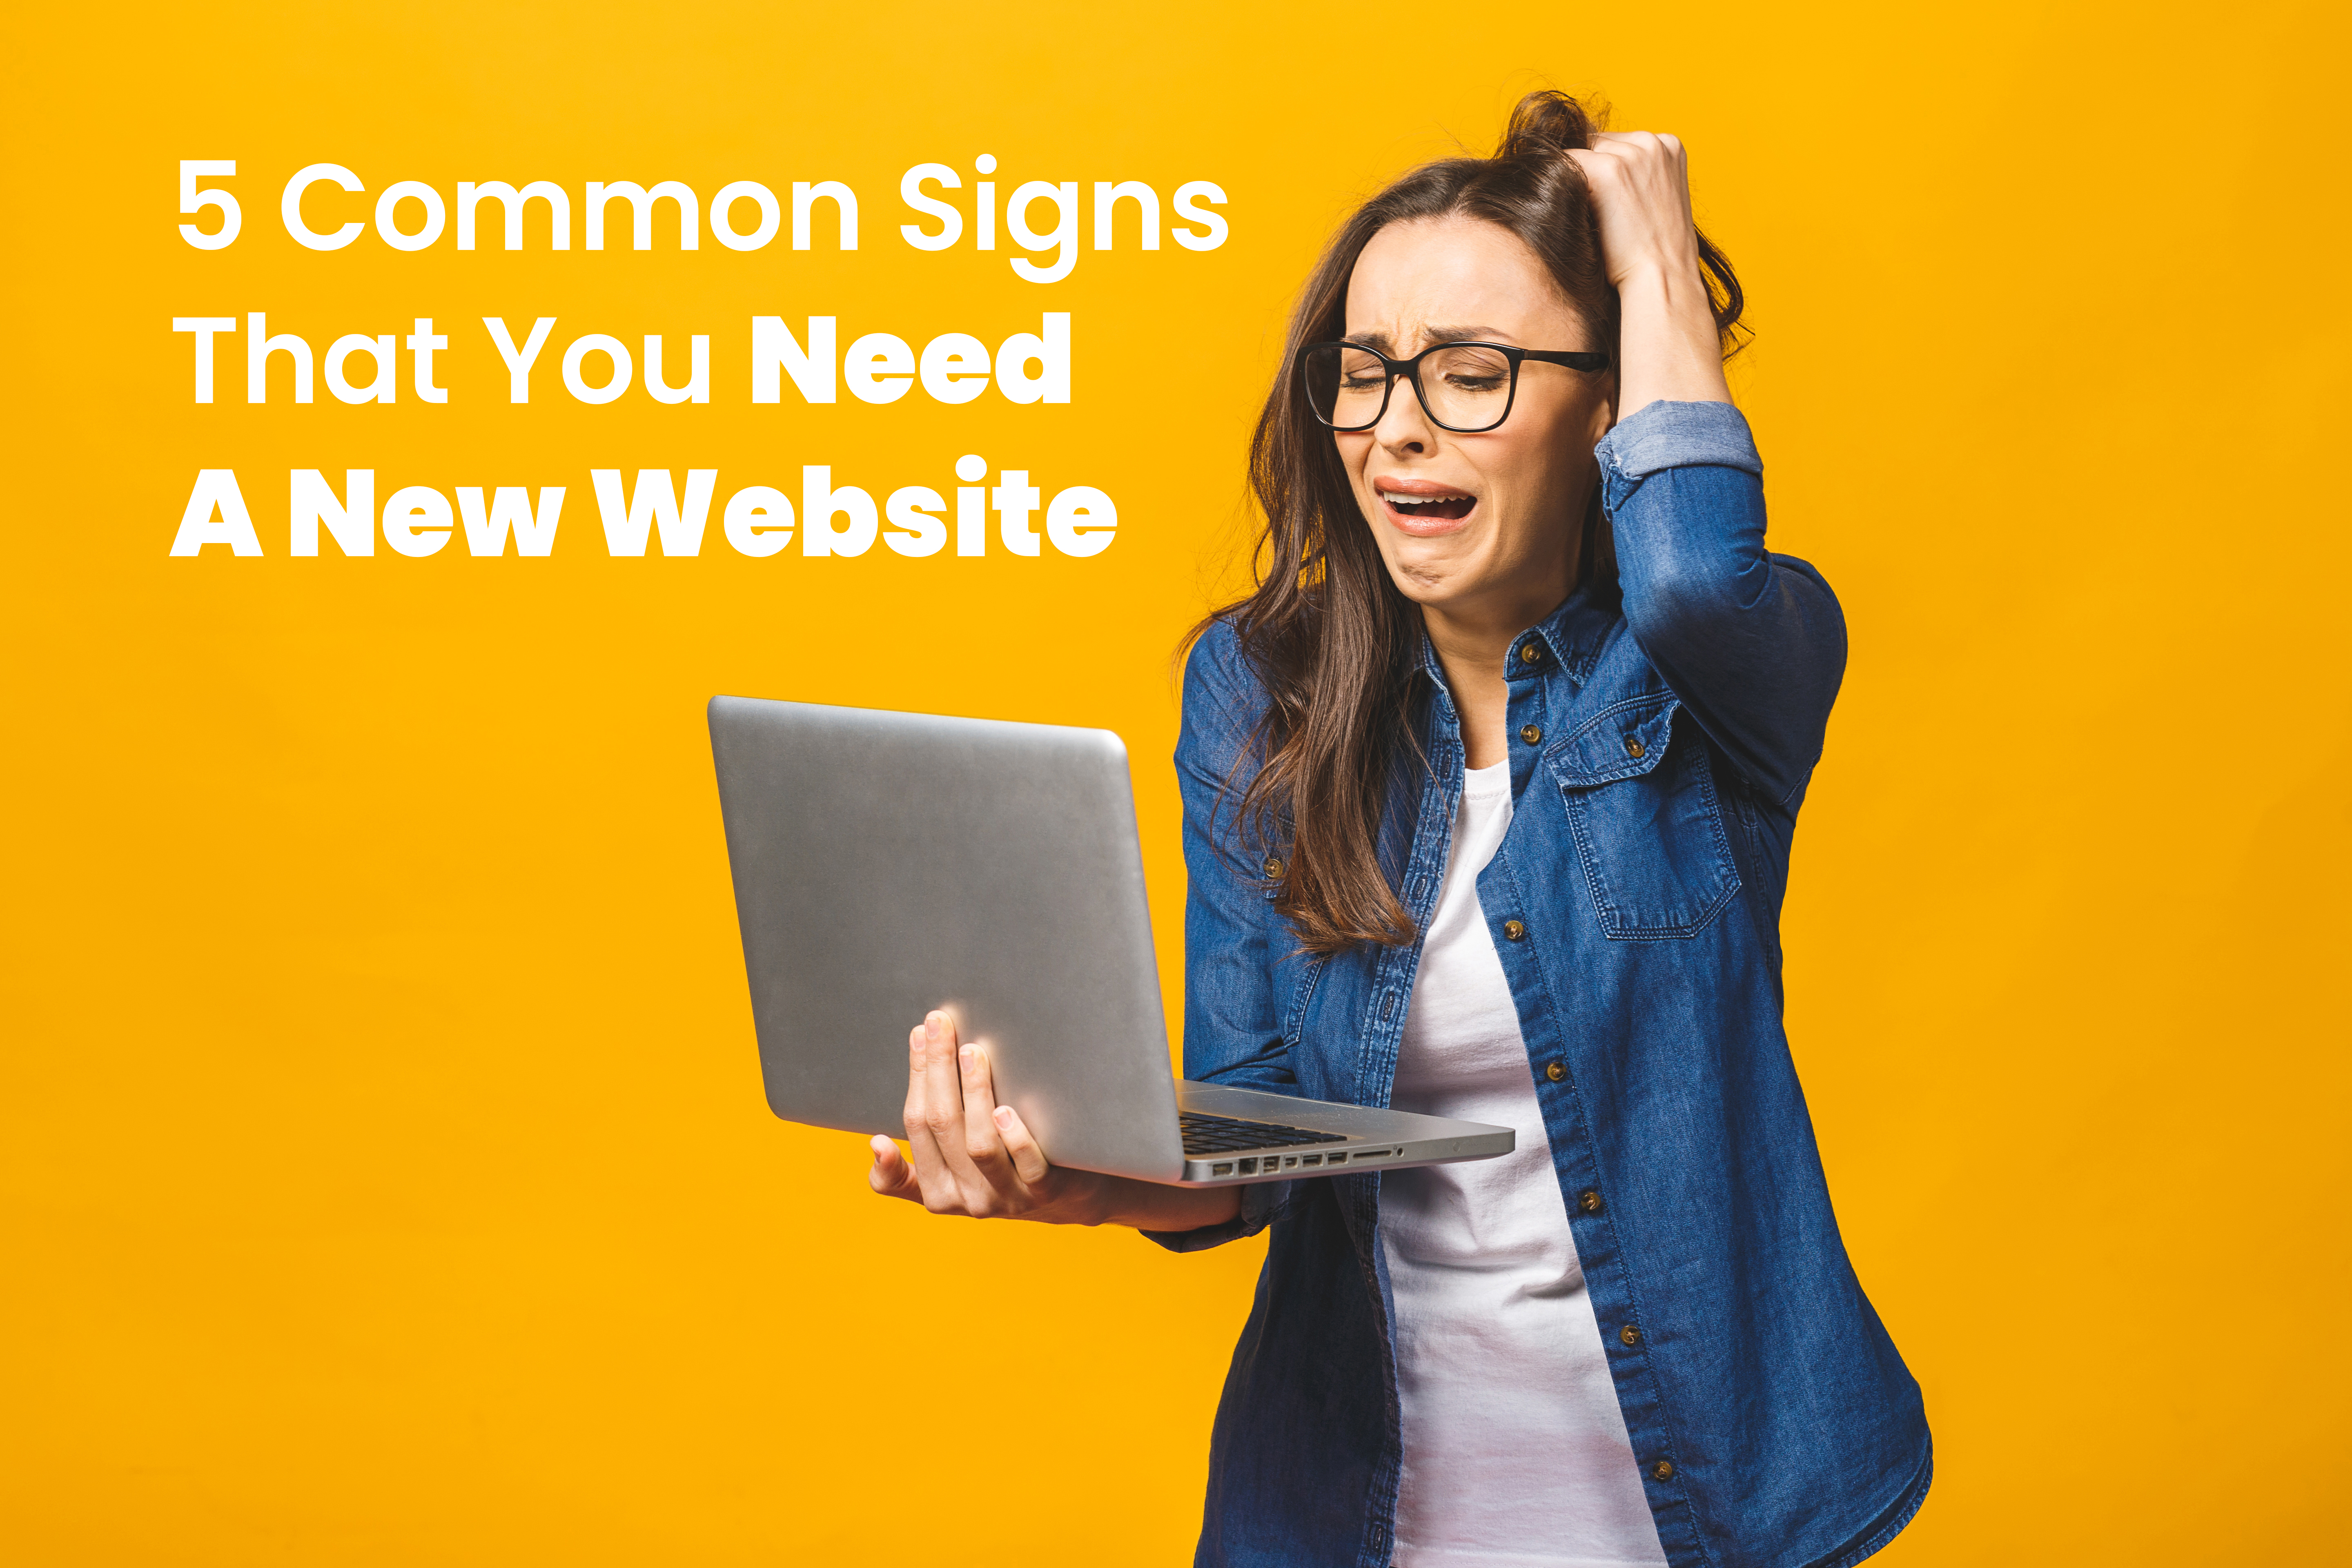 5 Common Signs That You Need A New Website